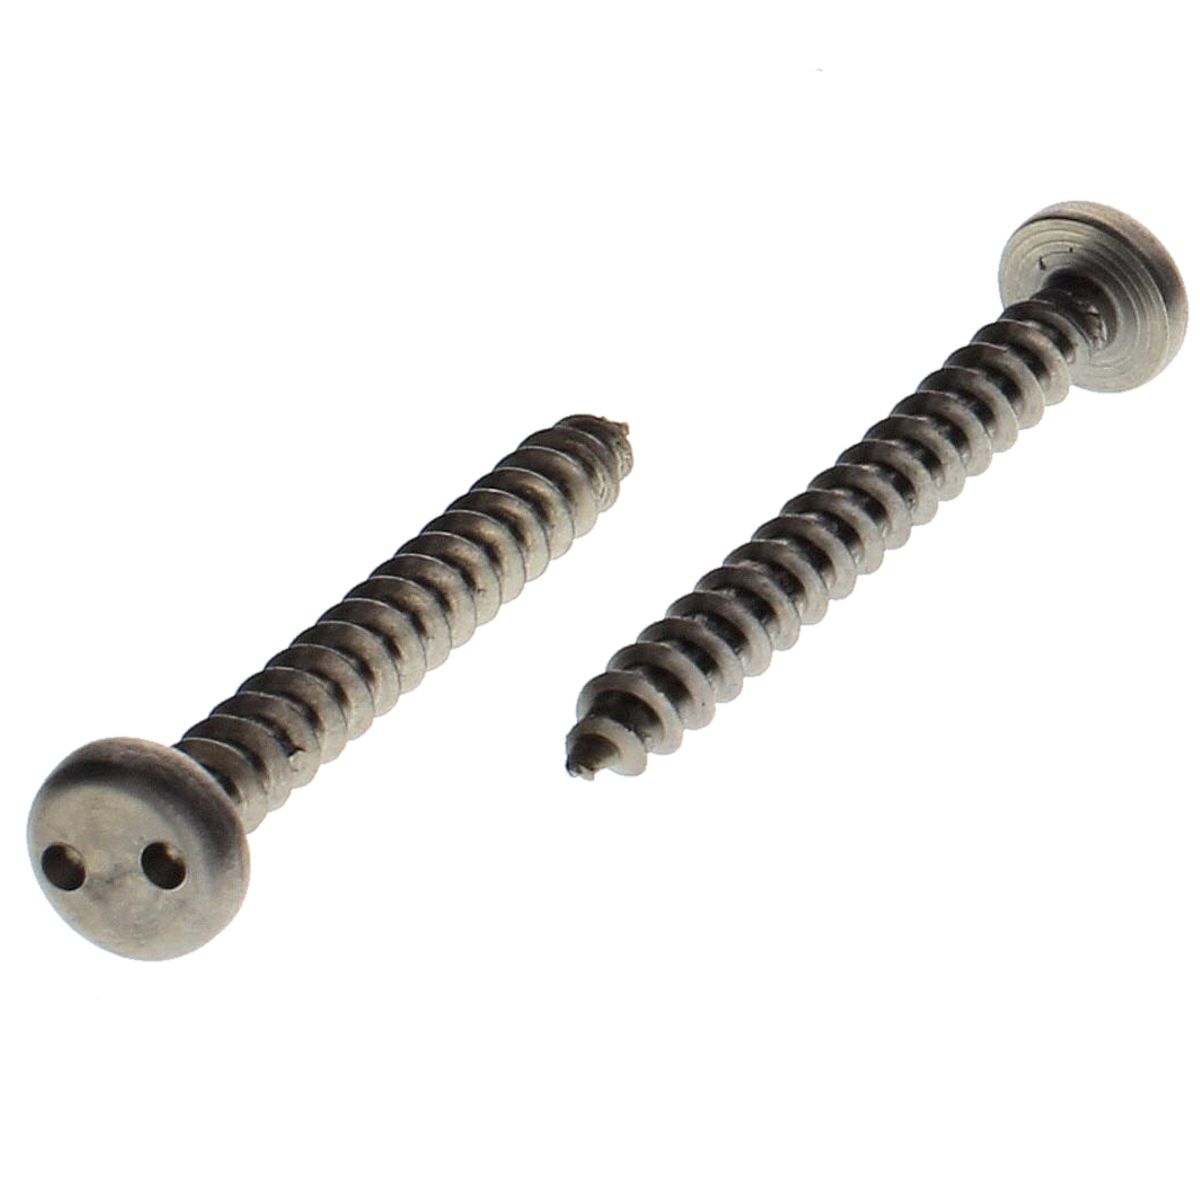 #14 x 1" Pan Head Spanner Security Tapping Screws — 18-8 Stainless Steel, 100/PKG